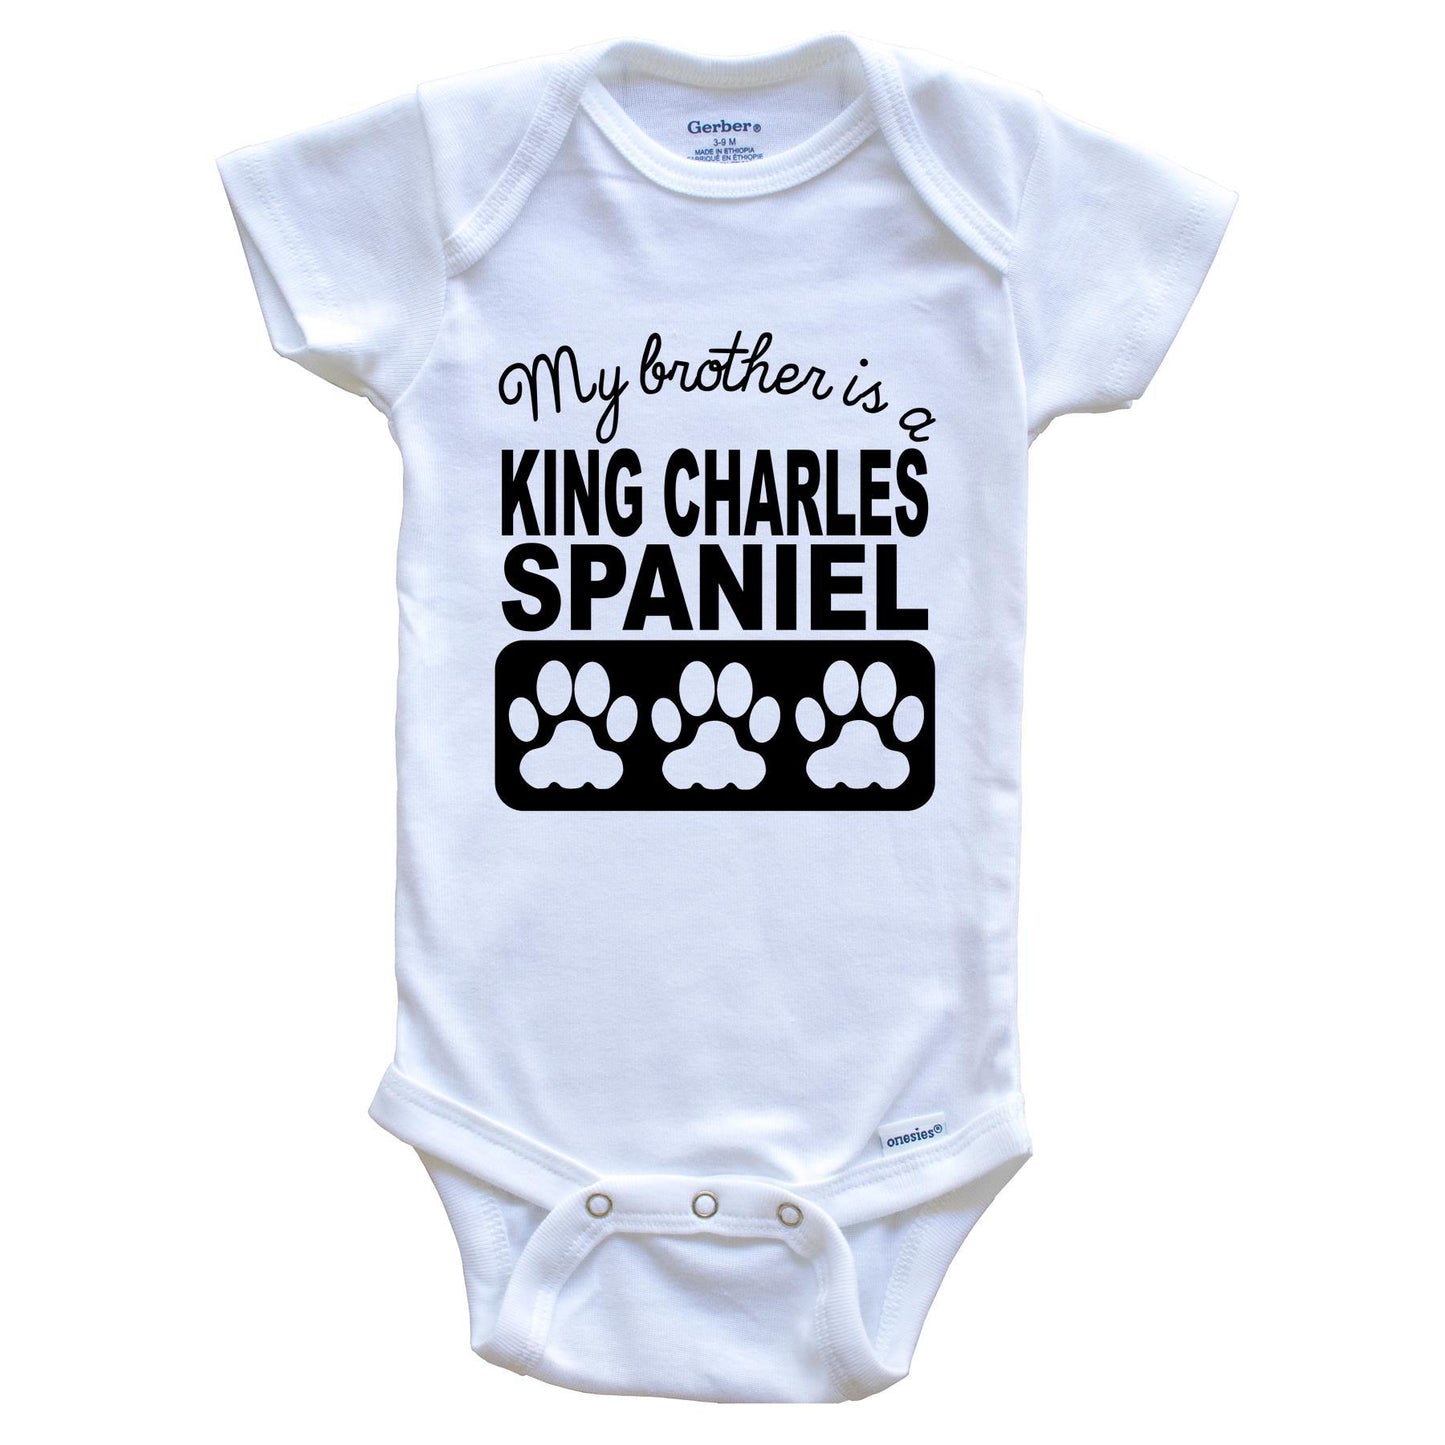 My Brother Is A King Charles Spaniel Baby Onesie